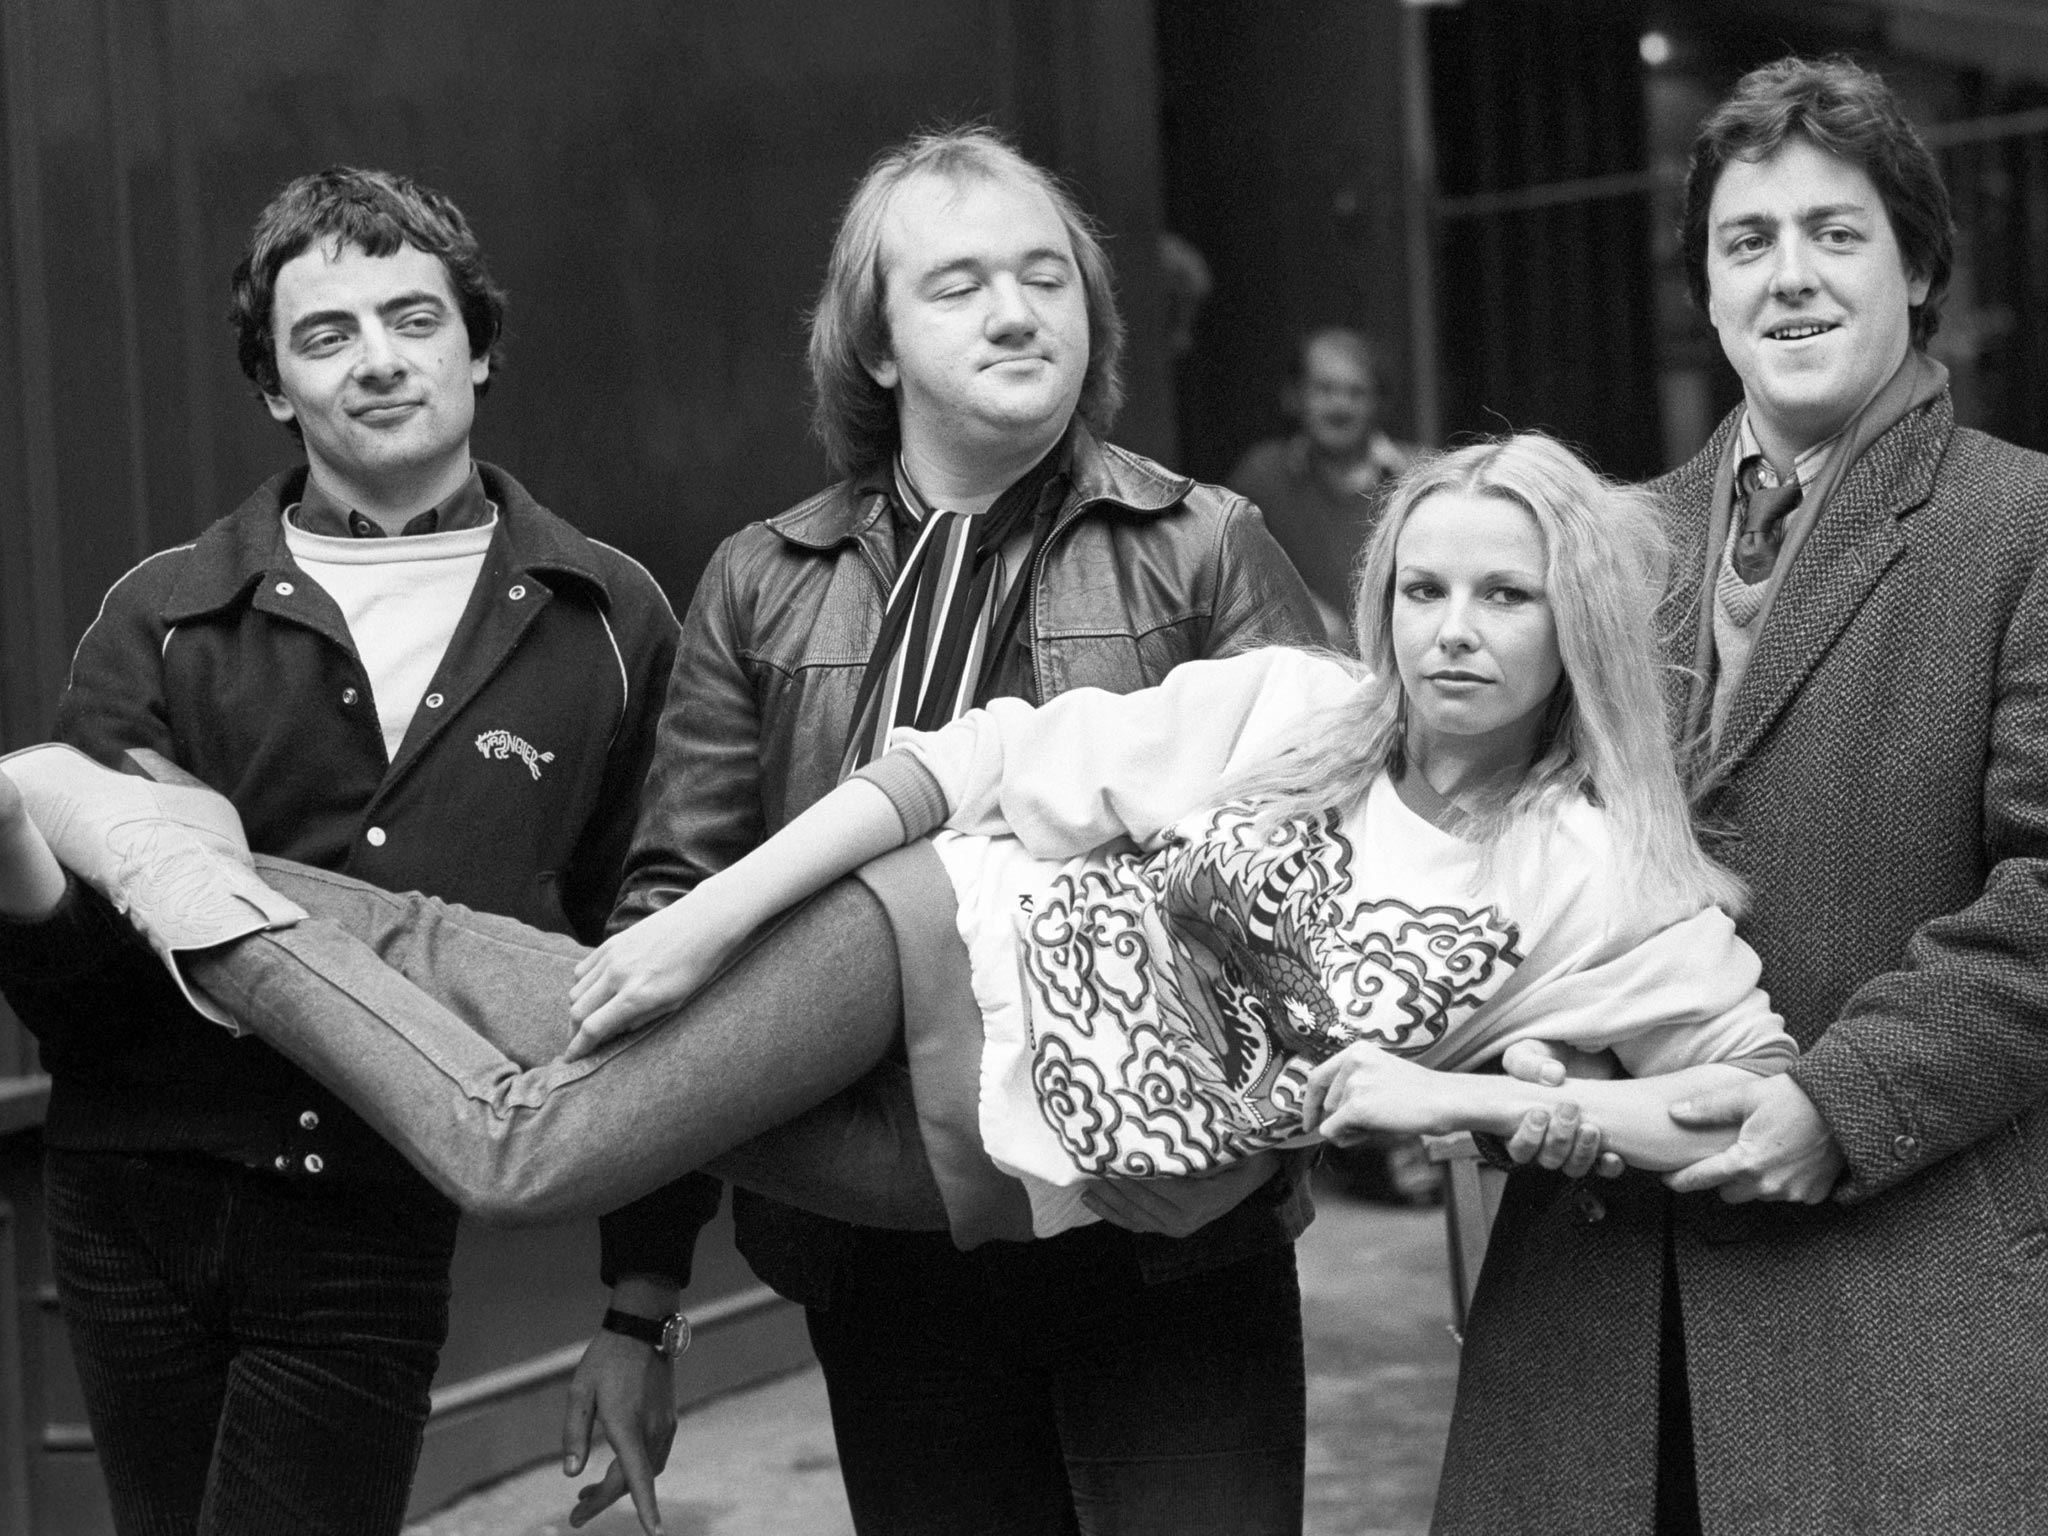 The 'Not the Nine O'Clock News's team (left to right), Rowan Atkinson, Mel Smith, and Griff Rhys Jones carrying Pamela Stephenson in 1980